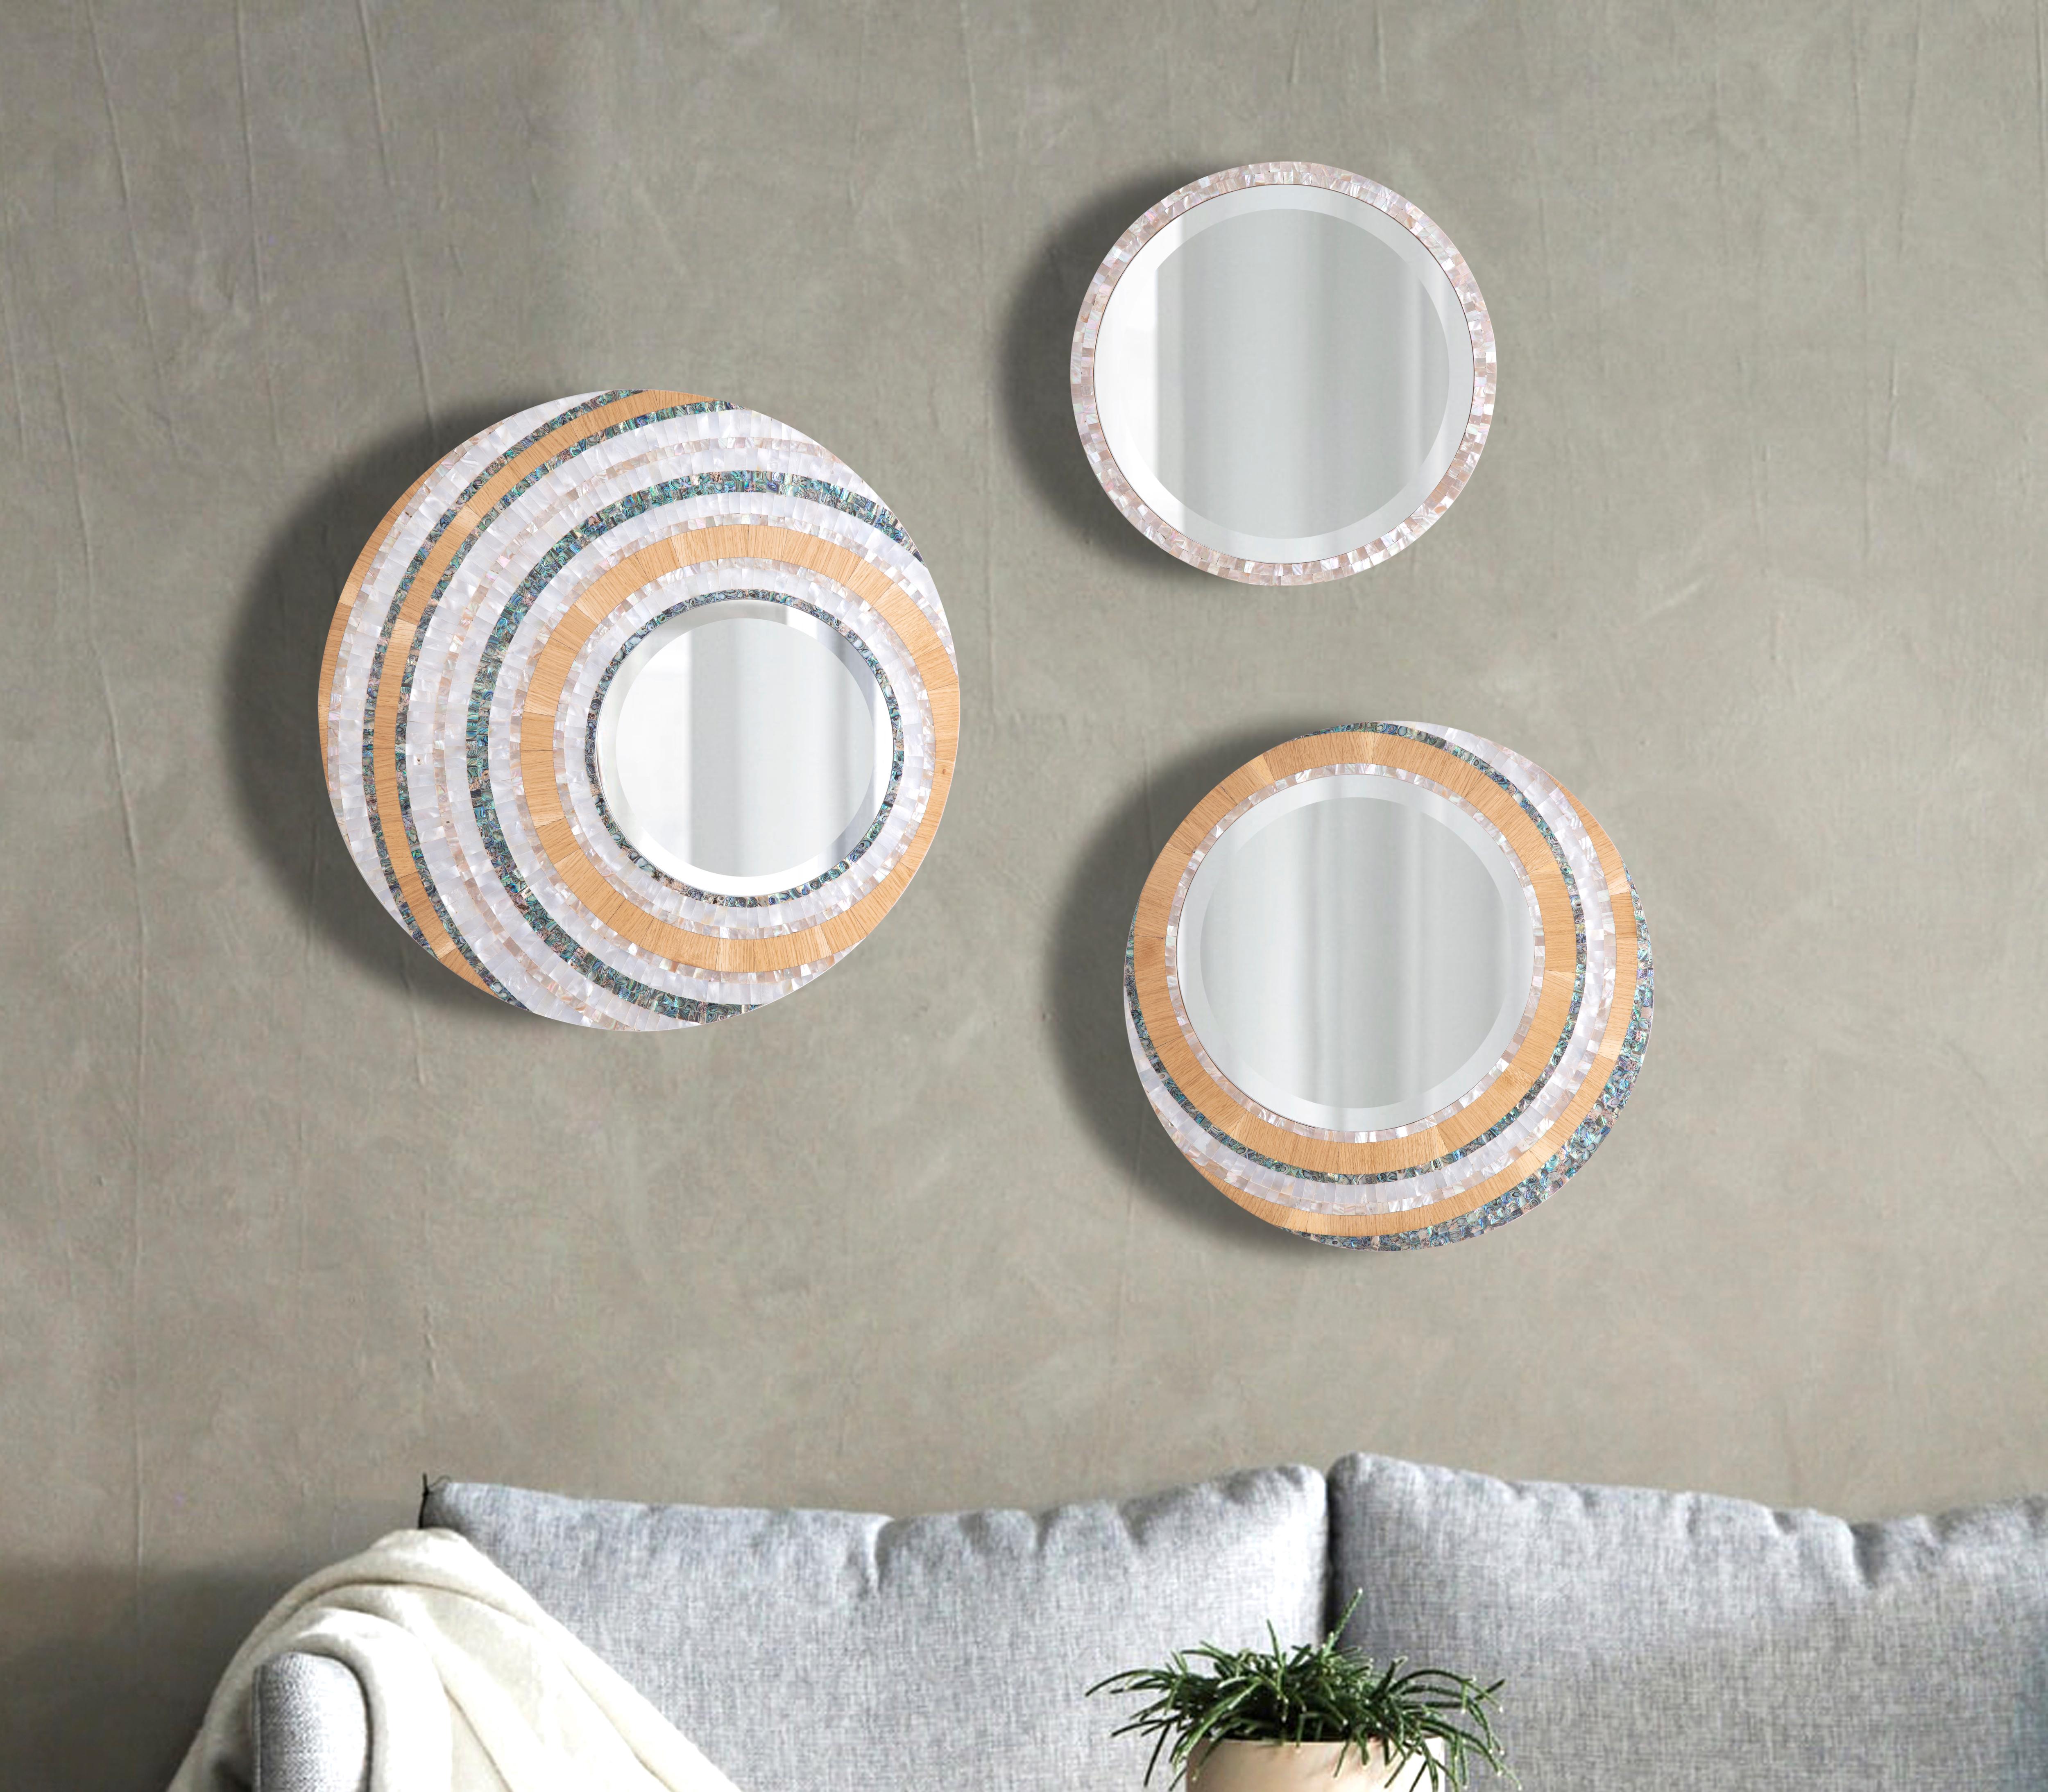 Hand-crafted decorative mirror with three colors of genuine mother-of-pearl - large.
Just like the sun, this trio of mirrors brings rays of warmth and joy to any space. They are intricately designed with three colors of genuine mother-of-pearl and